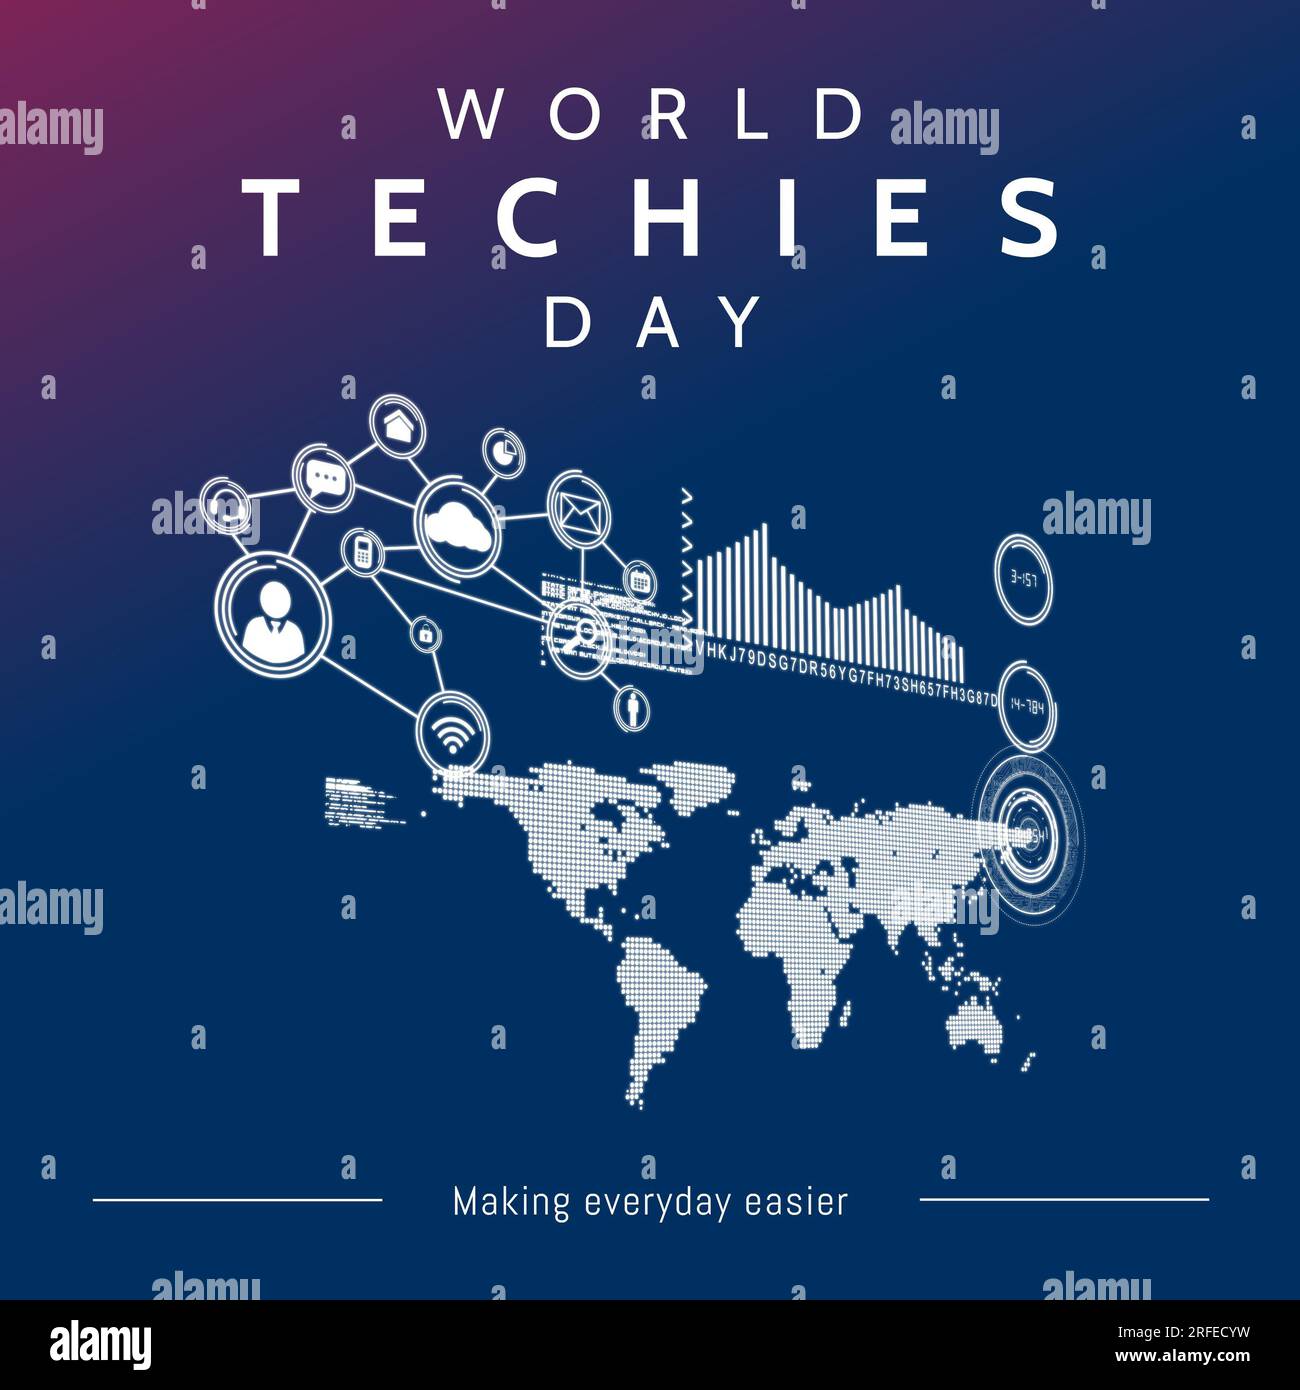 World techies day text in white with network of media icons, world map and data, on blue Stock Photo